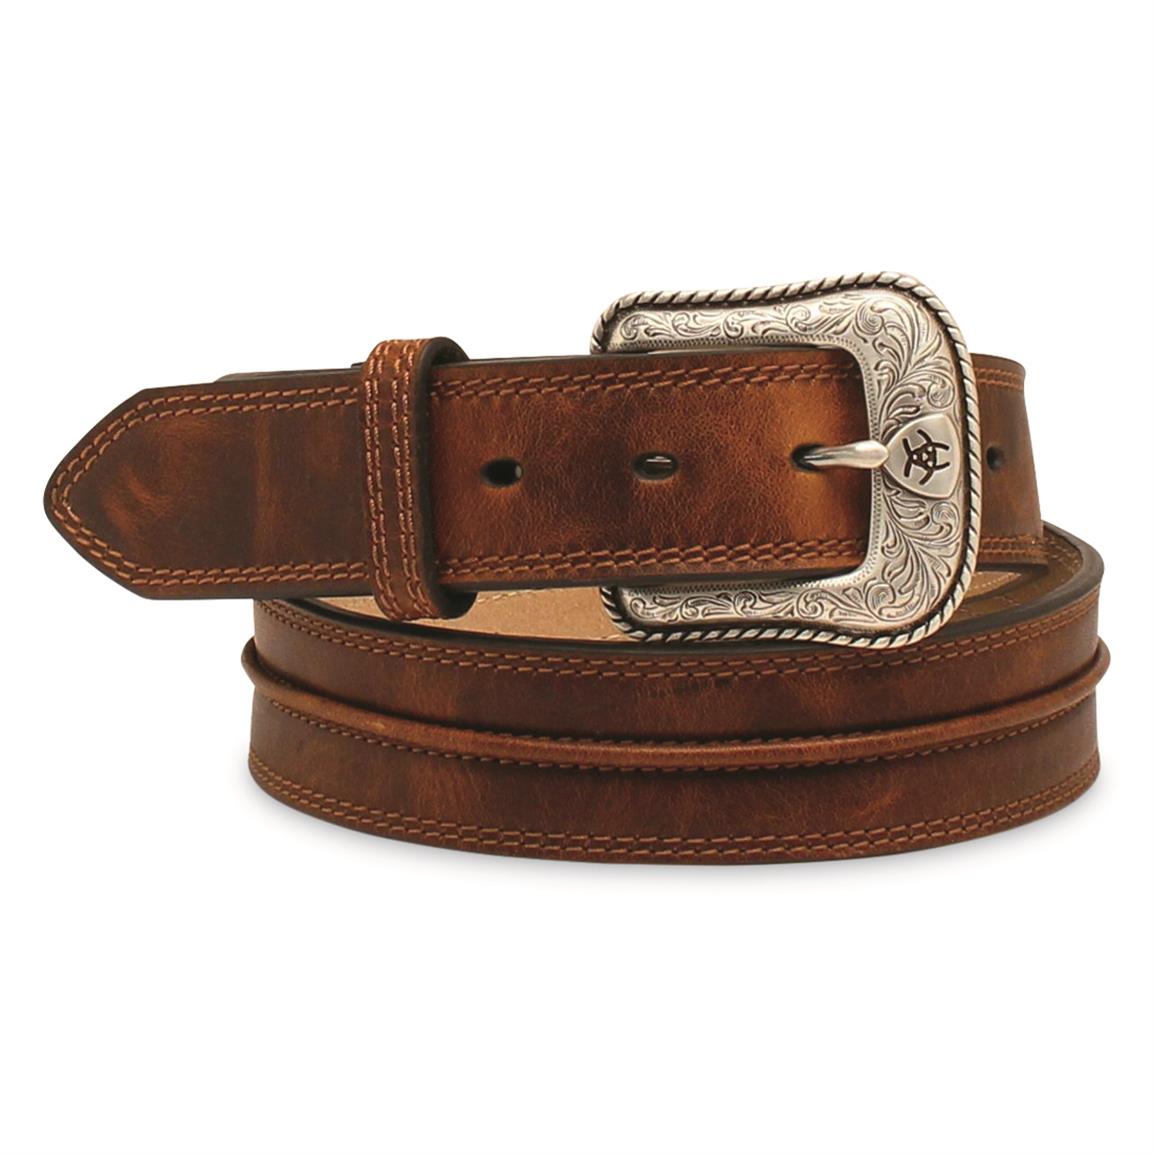 Ariat Belt with Center Piping, 1.5", Medium Brown